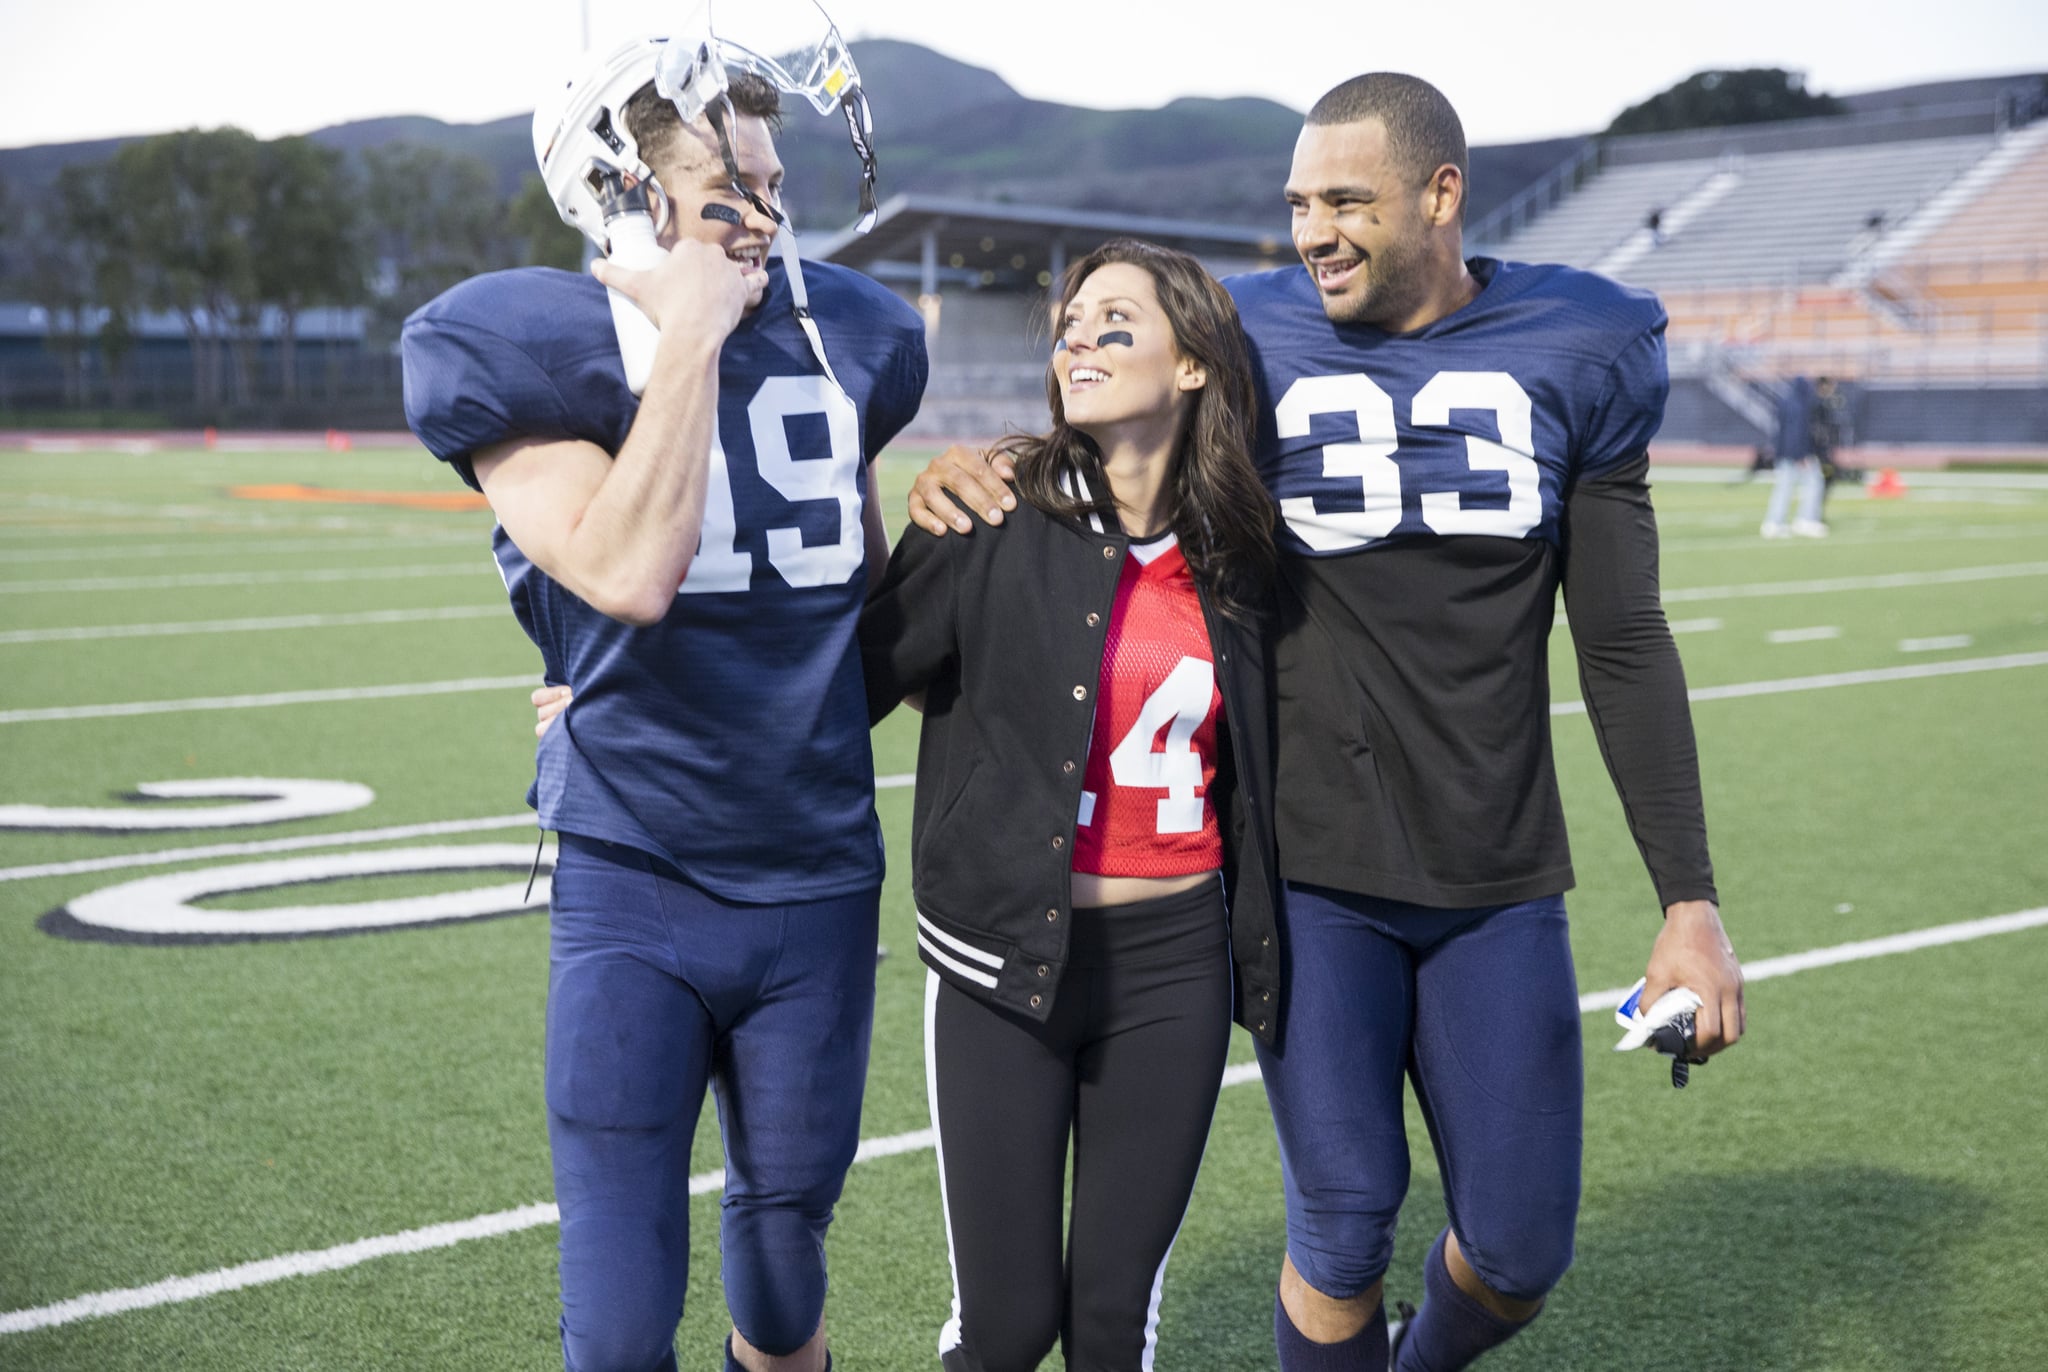 What Football Team Does Clay From The Bachelorette Play For Popsugar Entertainment